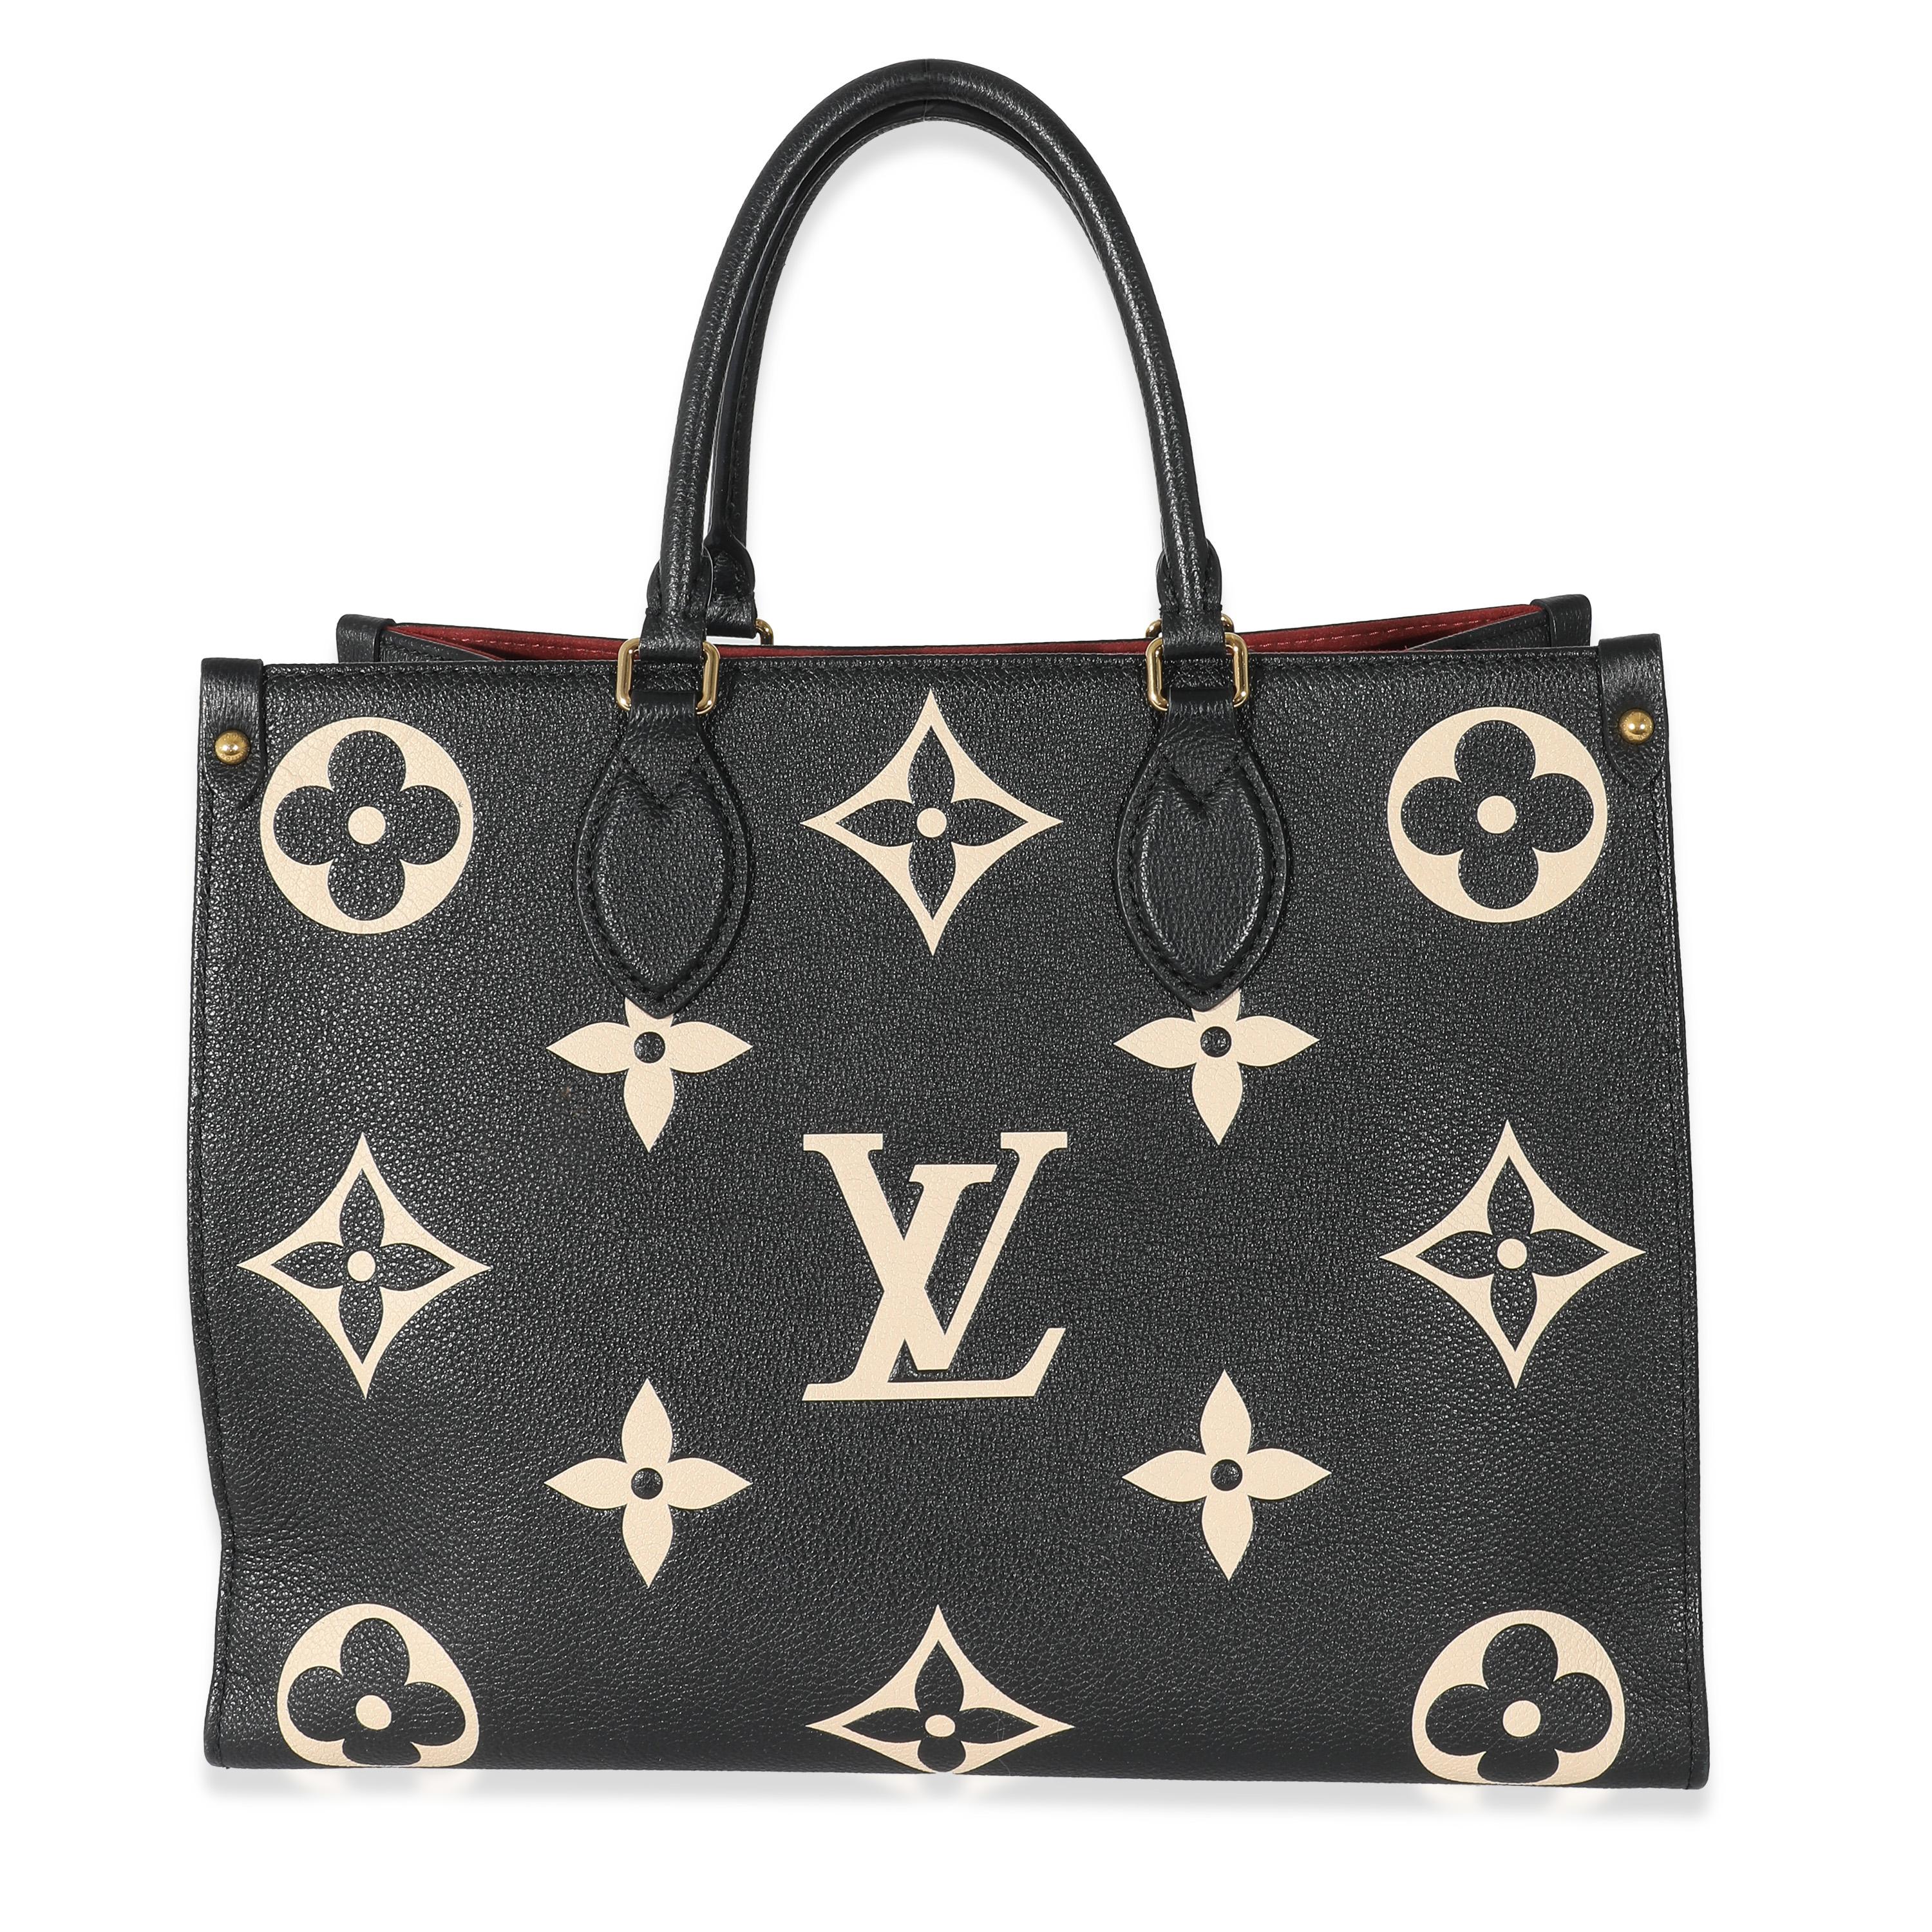 Listing Title: Louis Vuitton Black Beige Monogram Giant Empreinte Onthego MM
SKU: 133902
MSRP: 3500.00 USD
Condition: Pre-owned 
Condition Description: This bag says it all. The Onthego bag from Louis Vuitton is designed for busy lifestyles. Topped